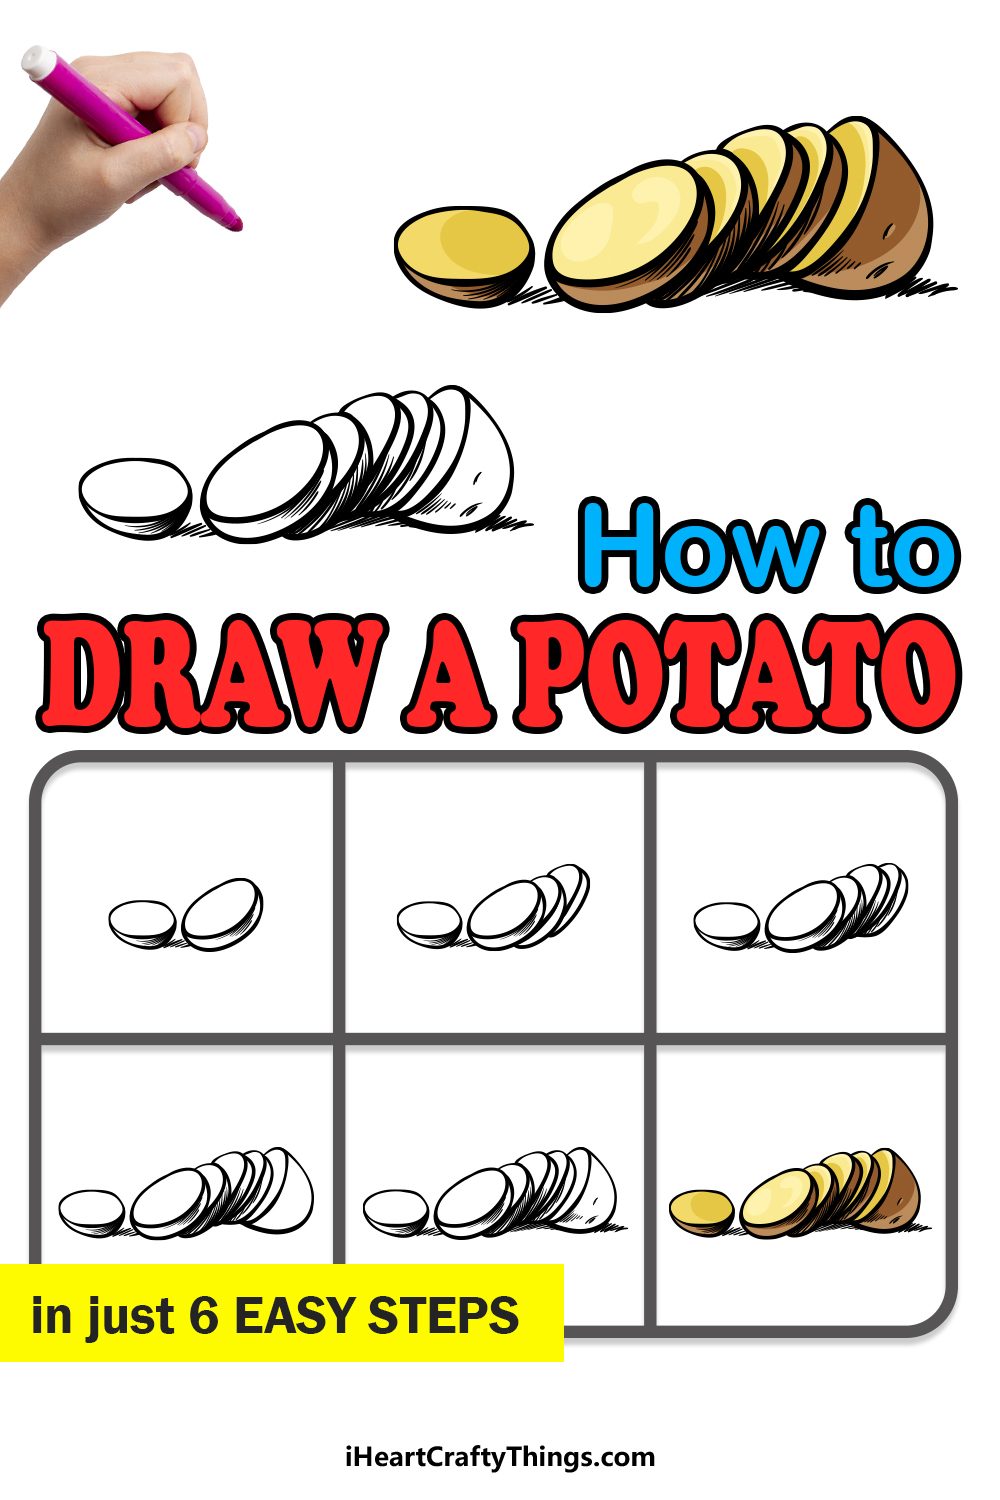 how to draw a potato in 6 easy steps